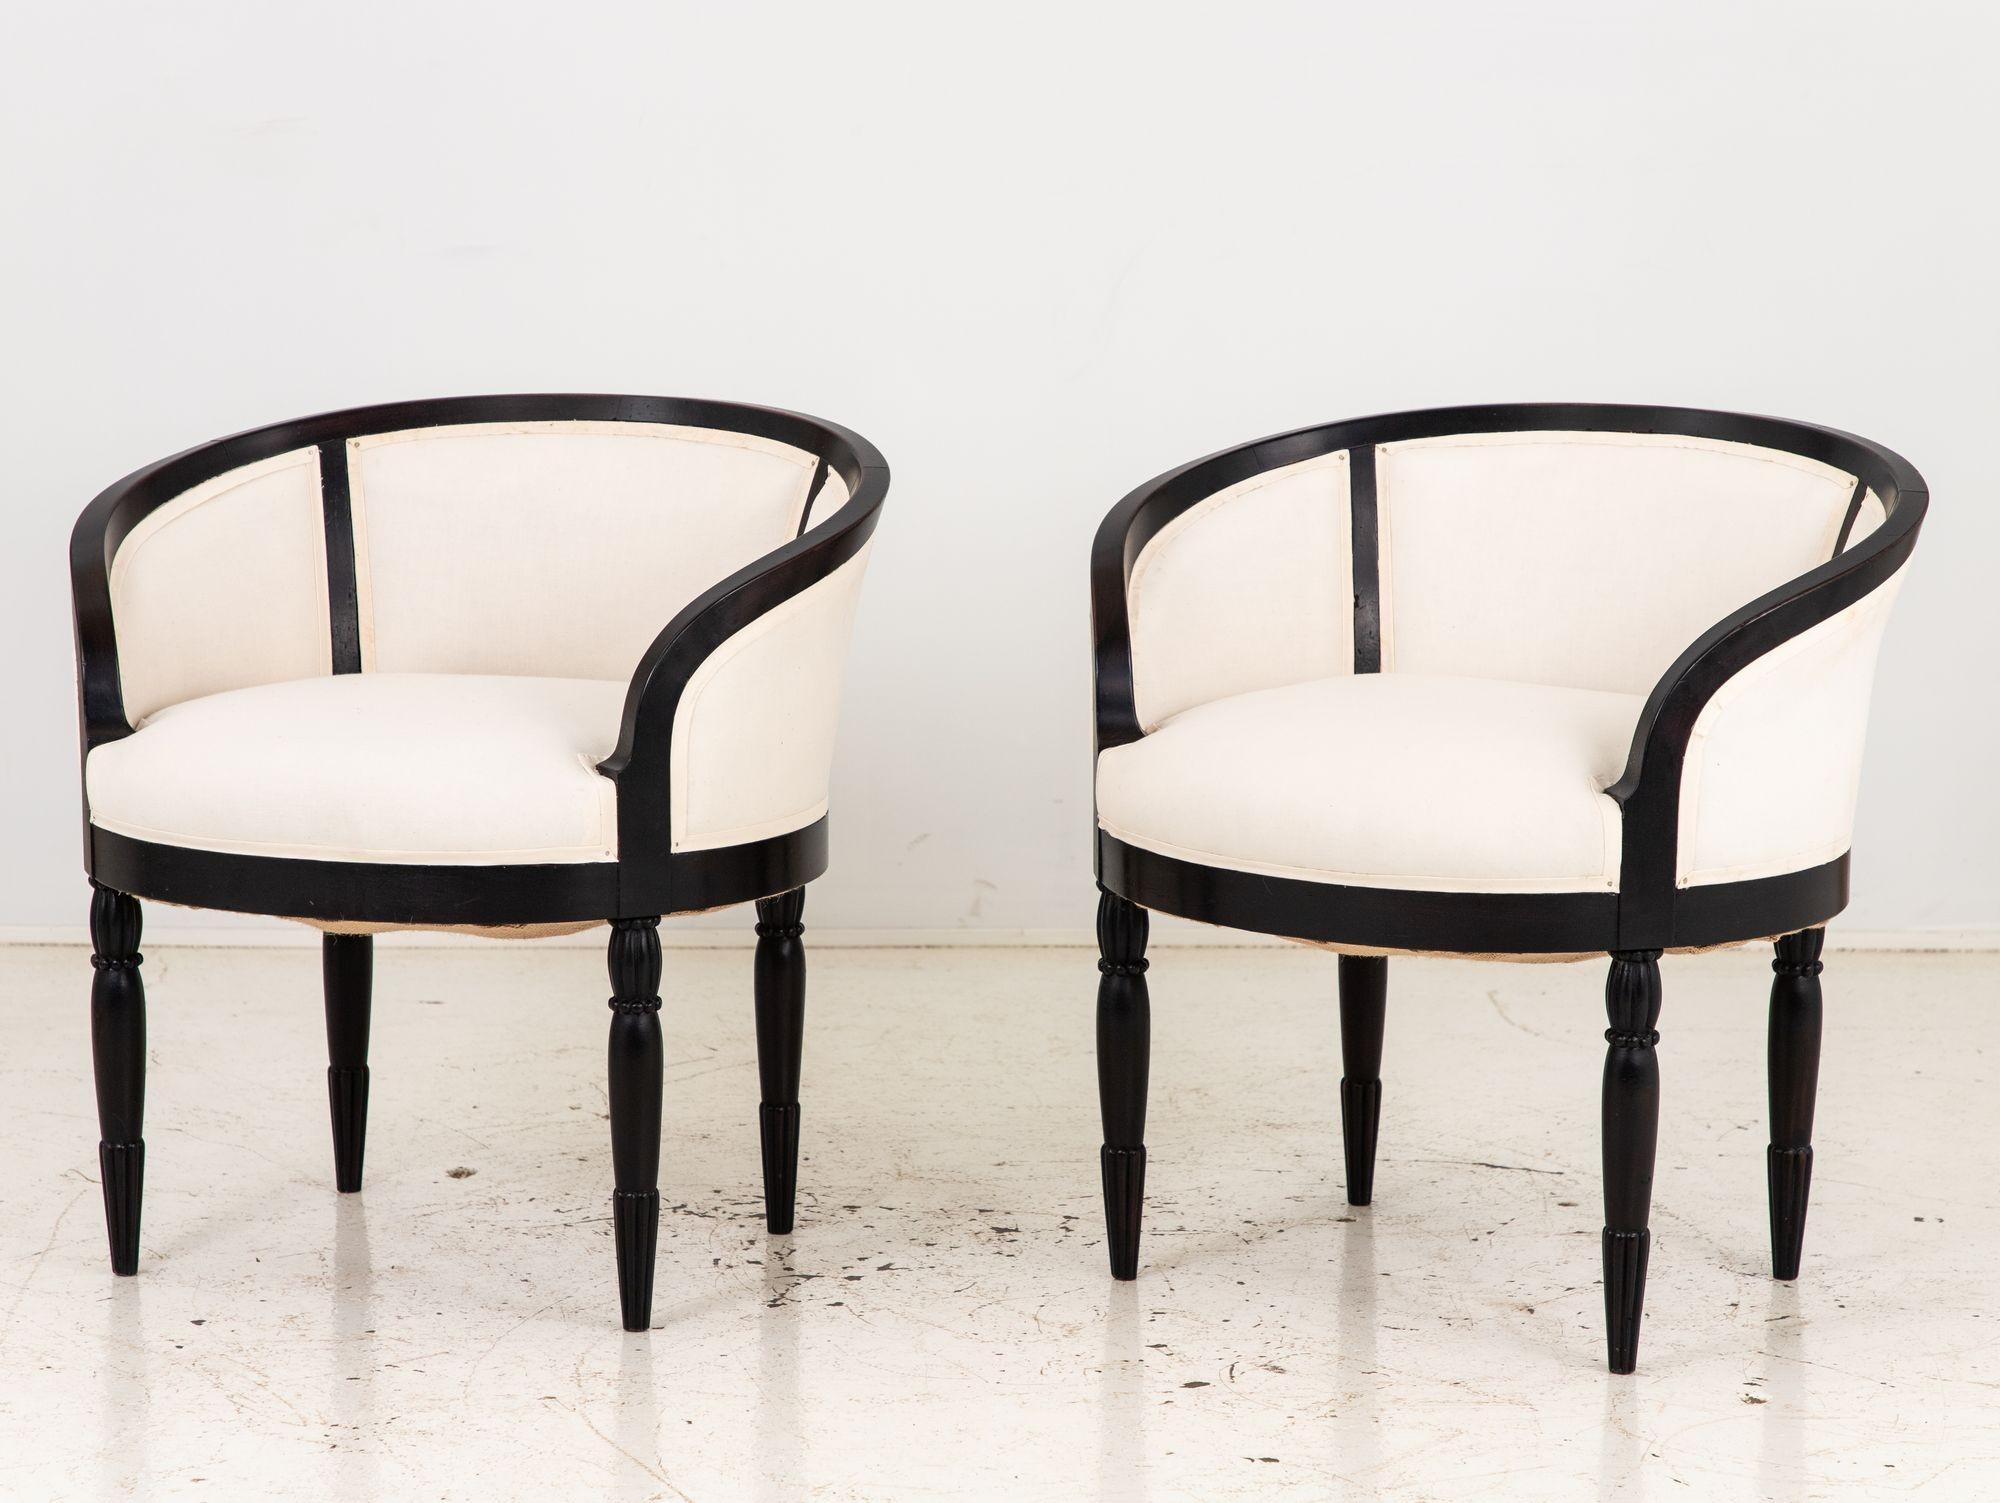 These exquisite 1930s French Art Deco chairs exude timeless elegance with their ebonized wood frame craftsmanship. Standing as a testament to the roaring 1920s aesthetic, these chairs are ready for a new life with fresh upholstery. The rich,